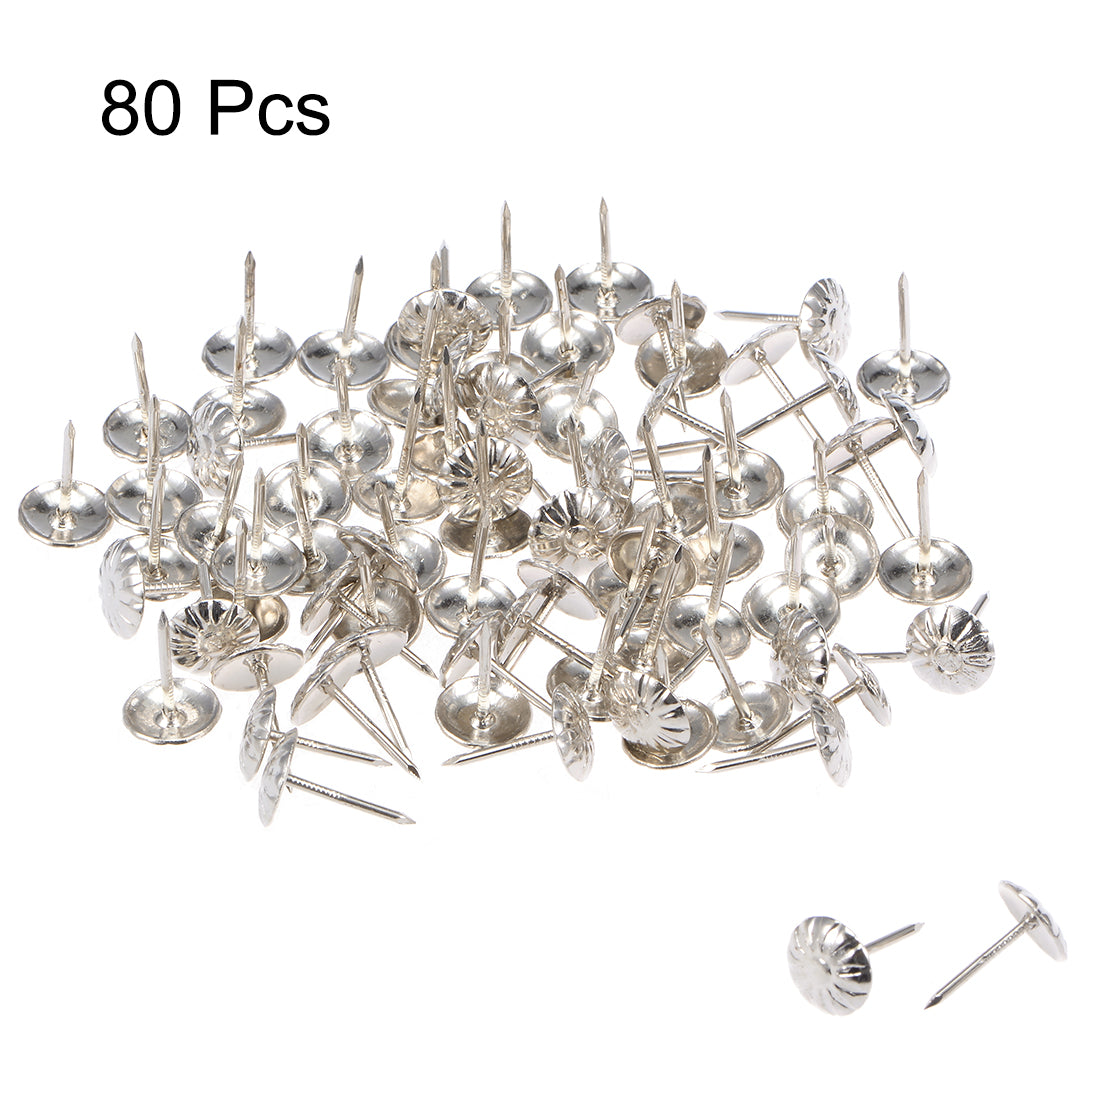 uxcell Uxcell Upholstery Nails Tacks 7/16-Inch Head Dia Antique Round Thumb Push Pins Silver Tone 80 Pcs